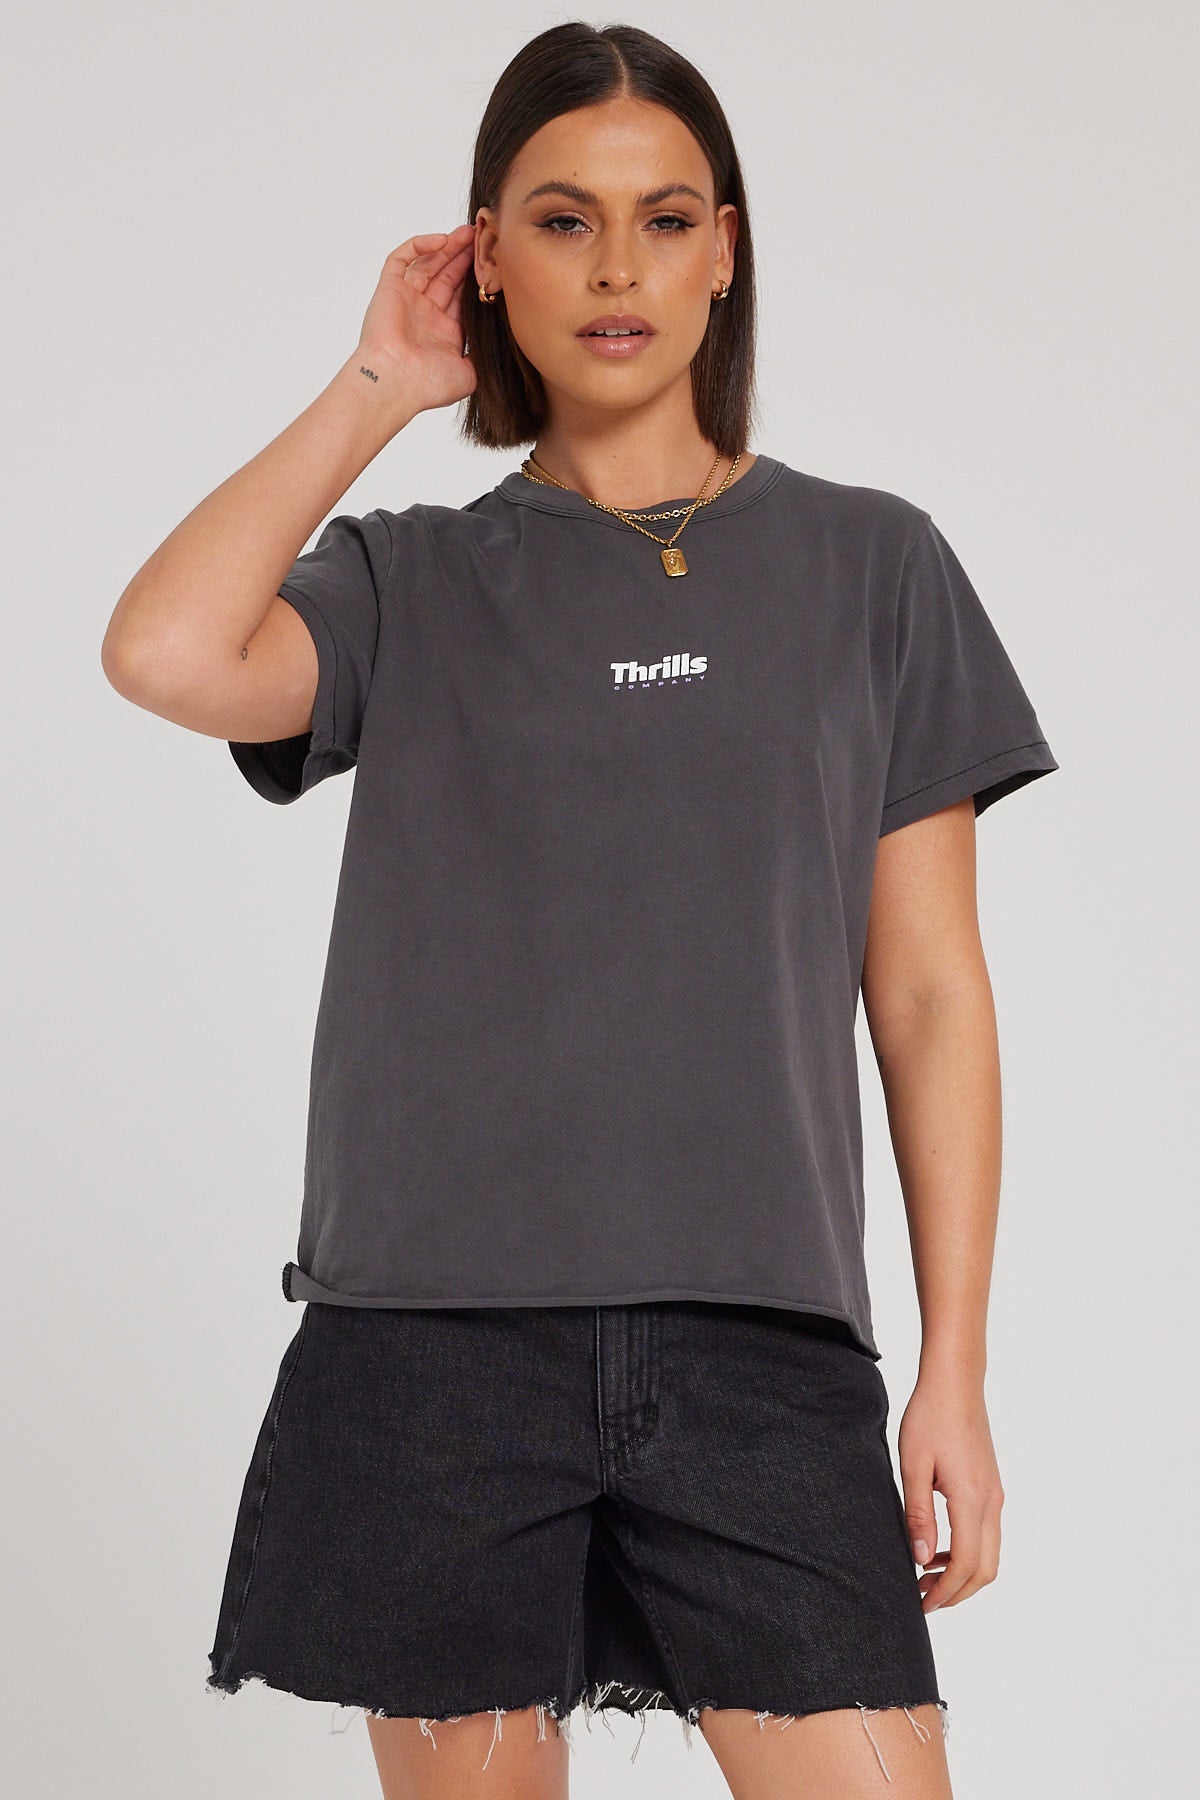 Thrills Paradox Relaxed Fit Tee Merch Black – Universal Store